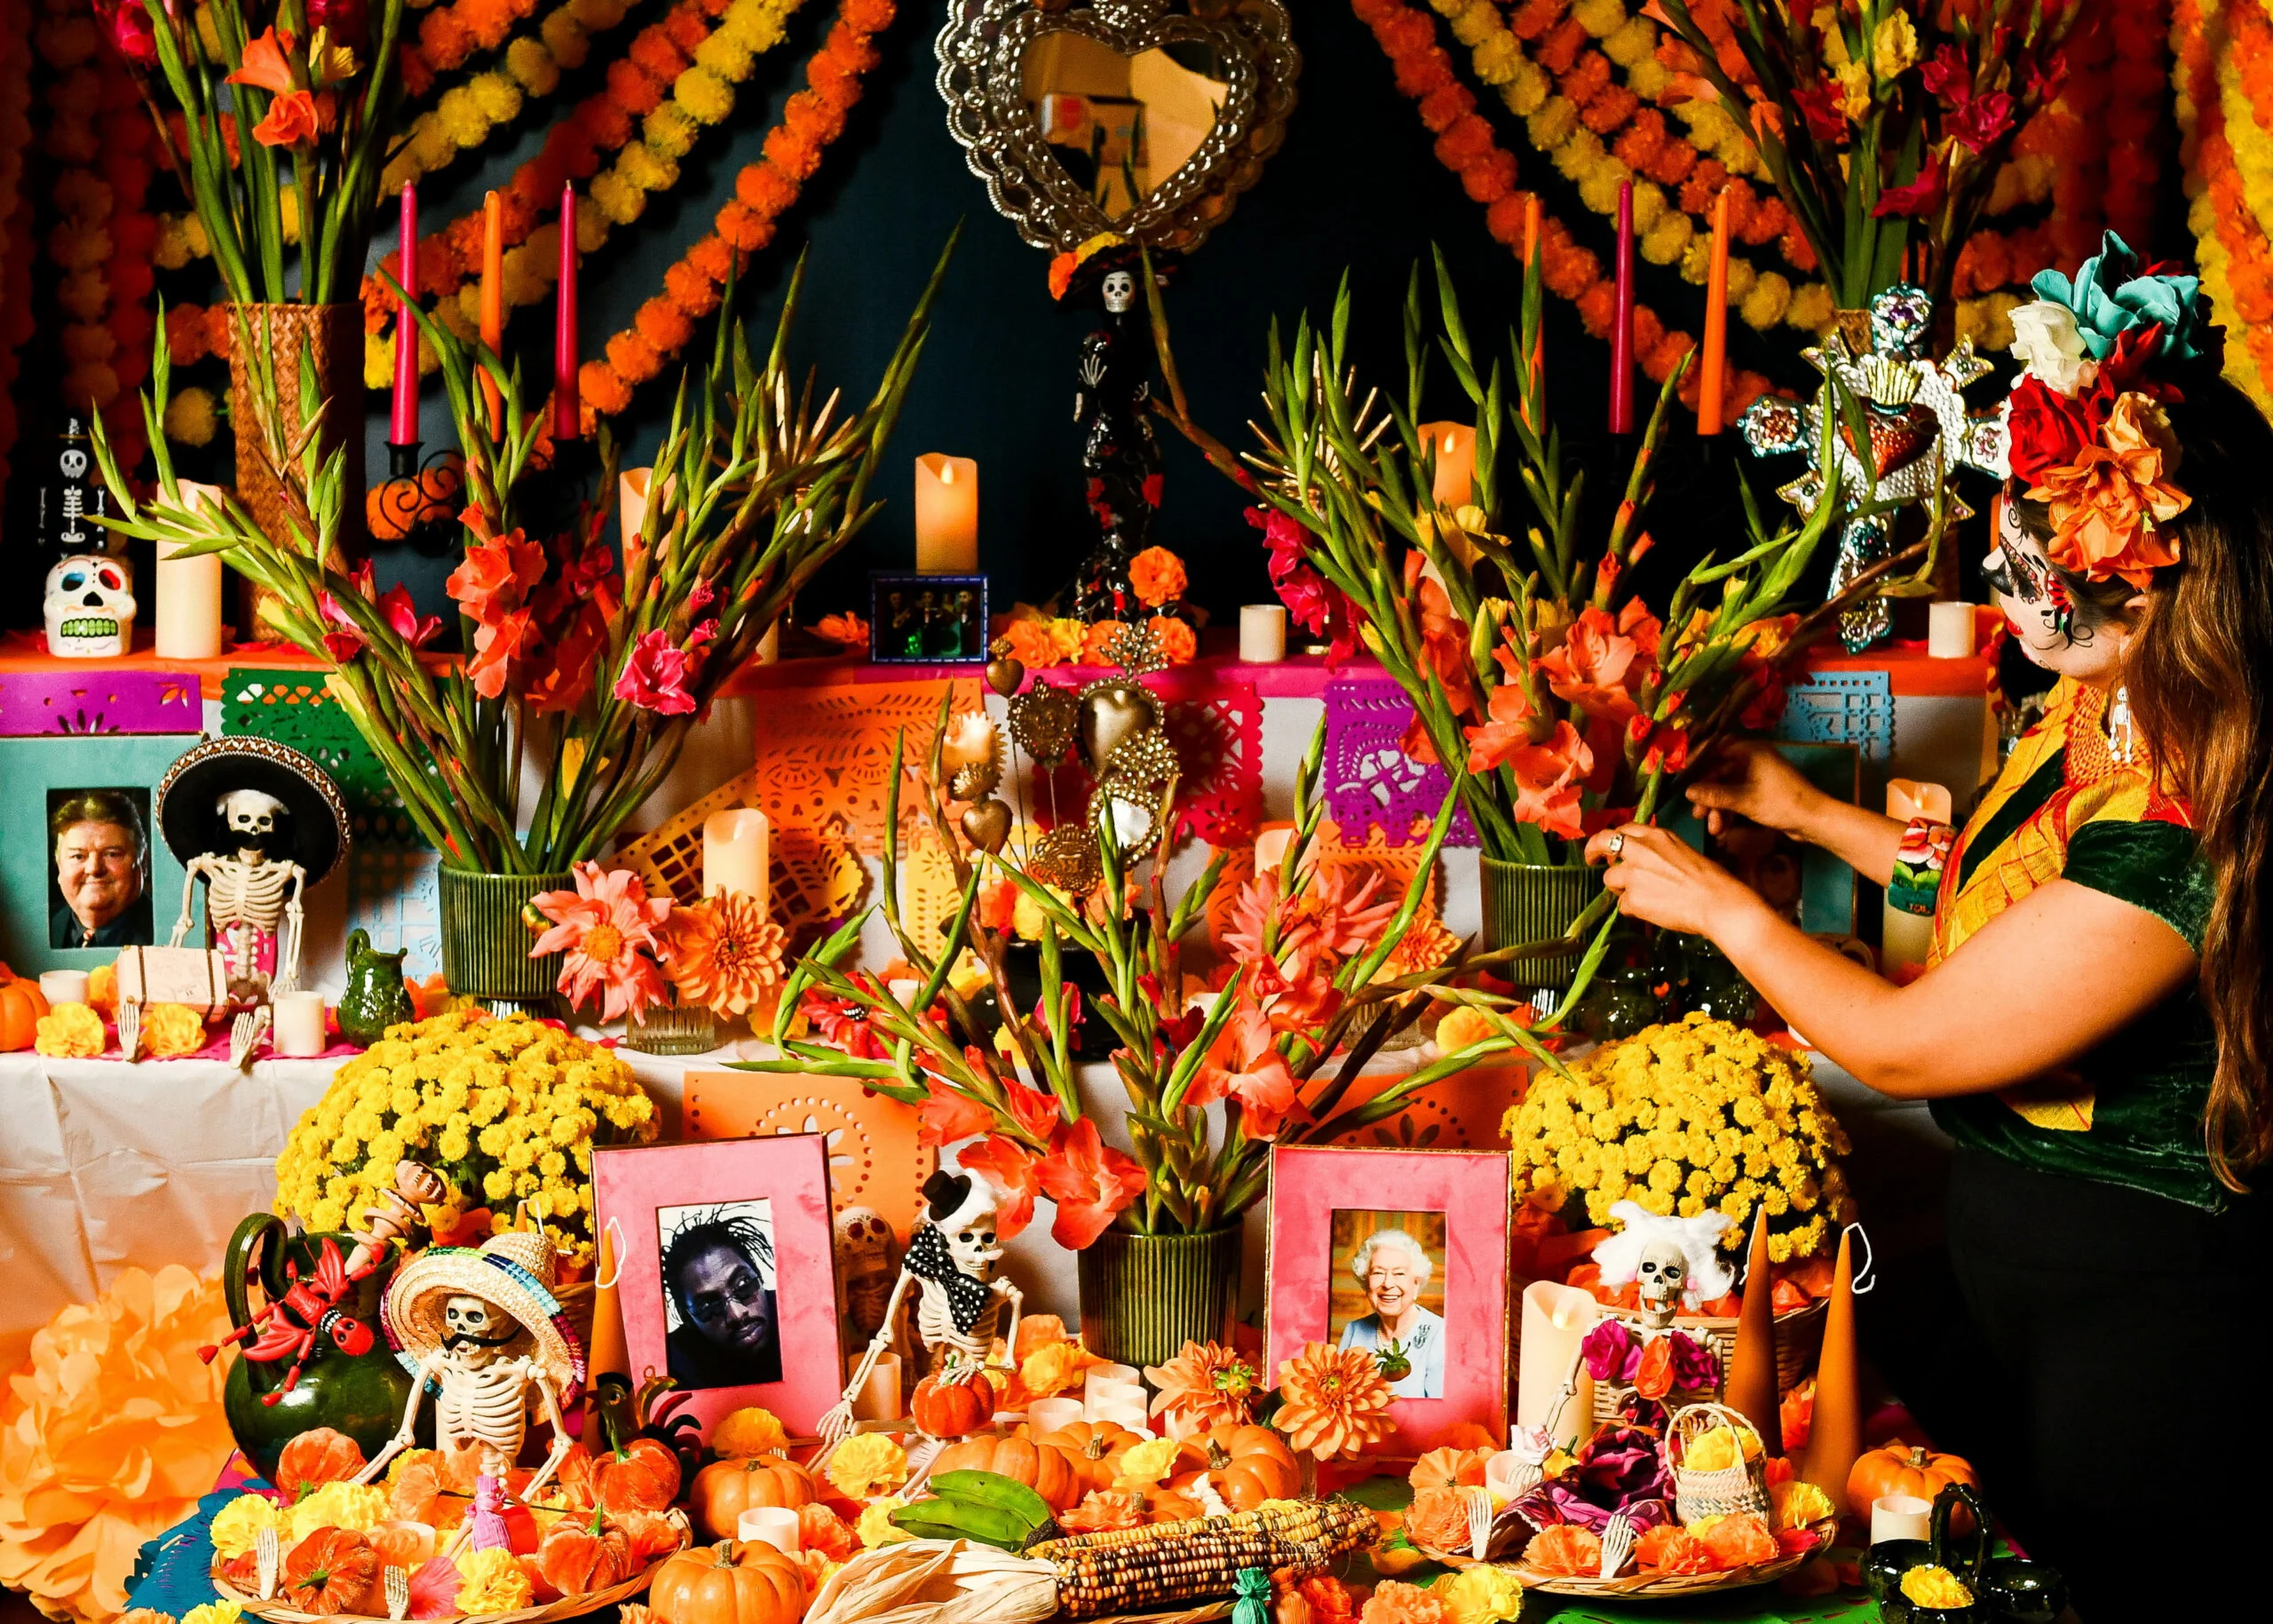 Day of the dead altar in Wahaca restaurant, with flowers, calacas, candles and memories of people who are no longer with us